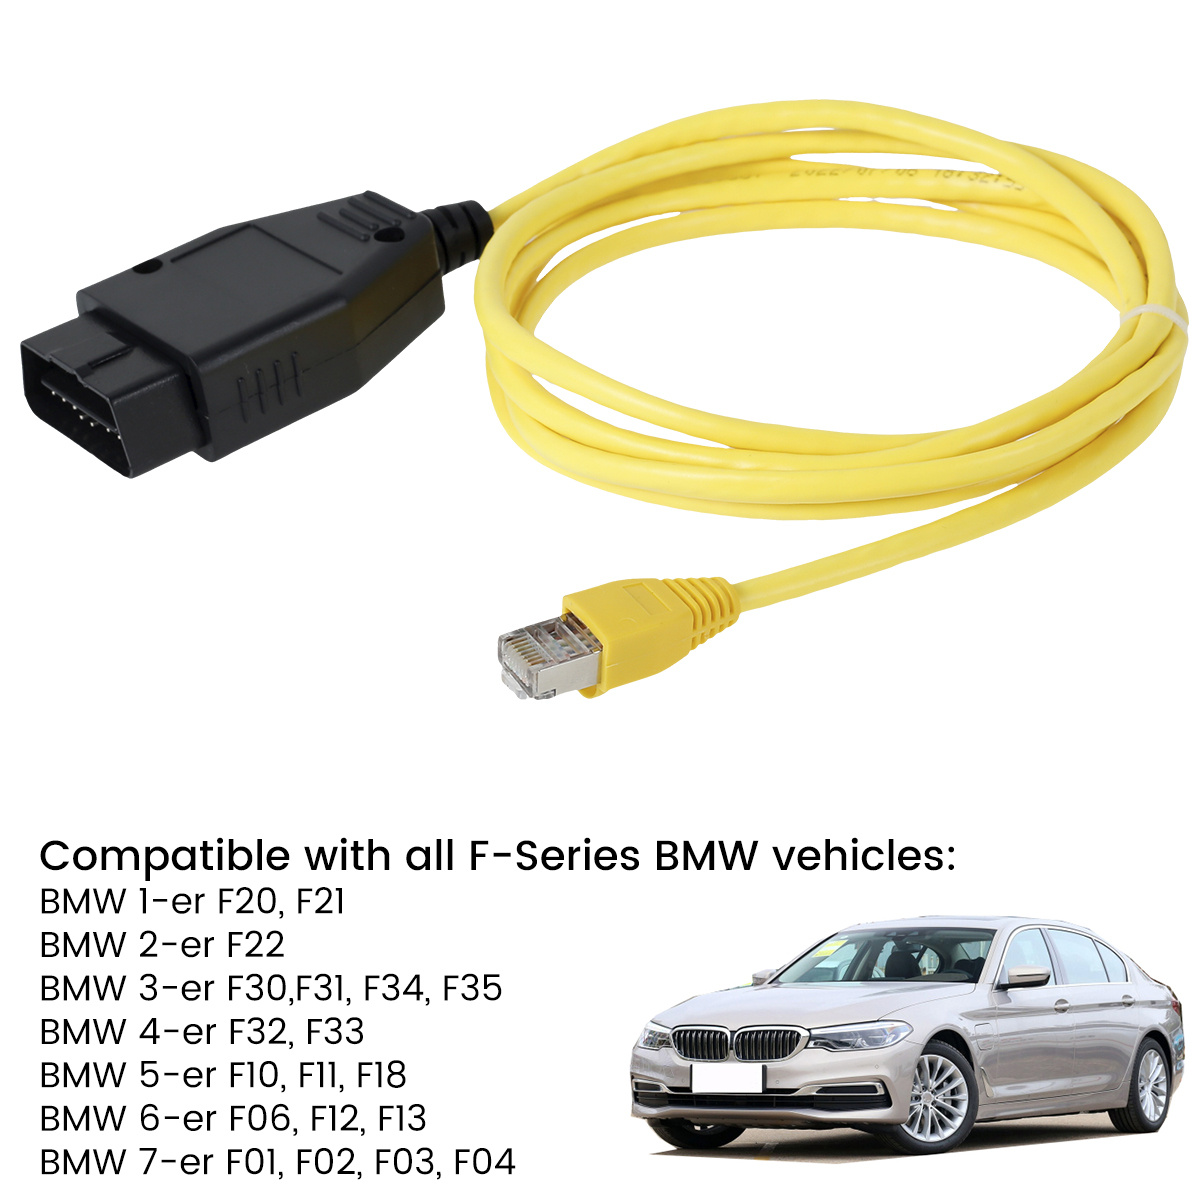 BMW ENET (Ethernet to OBD) Interface Cable E-SYS ICOM Coding F-series ESYS